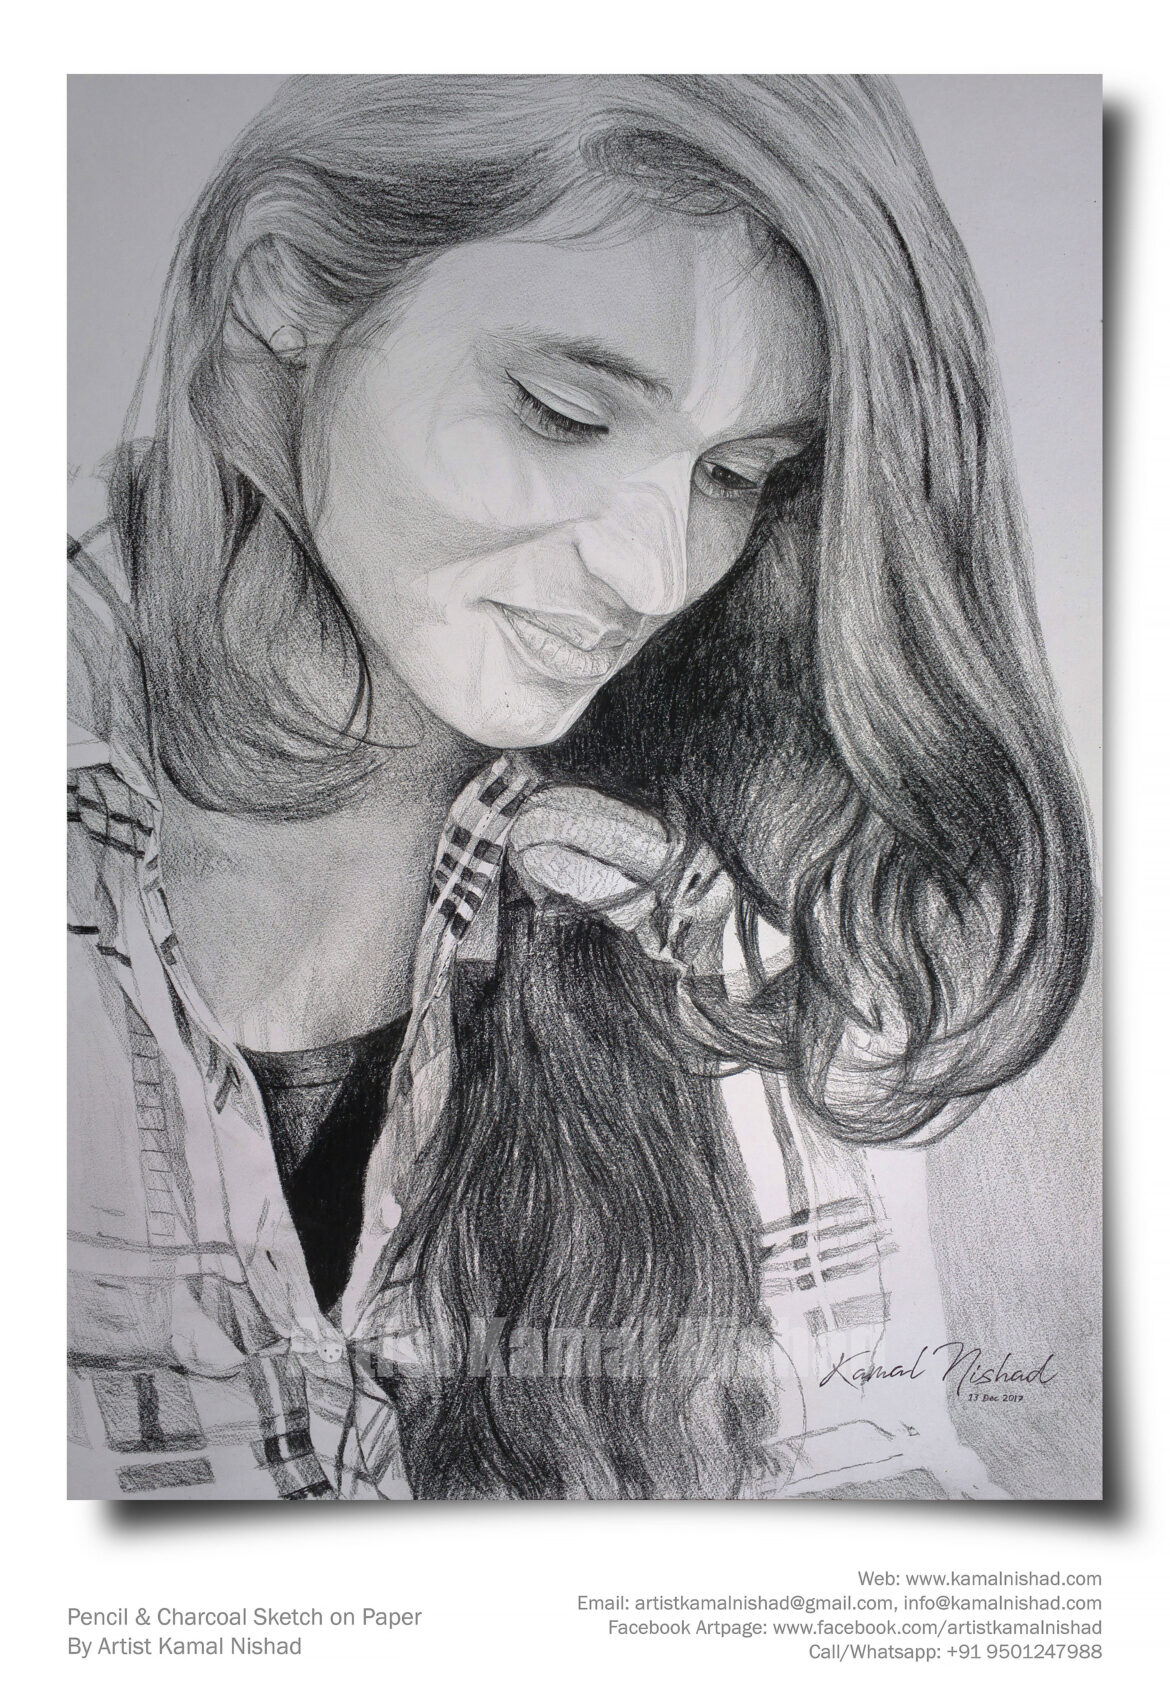 A BEAUTIFUL GIRL with SMILE | Pencil & Charcoal Sketch This is a Handmade Pencil & Charcoal Sketch “A BEAUTIFUL GIRL with SMILE”. Created by © Kamal Nishad. All rights reserved.